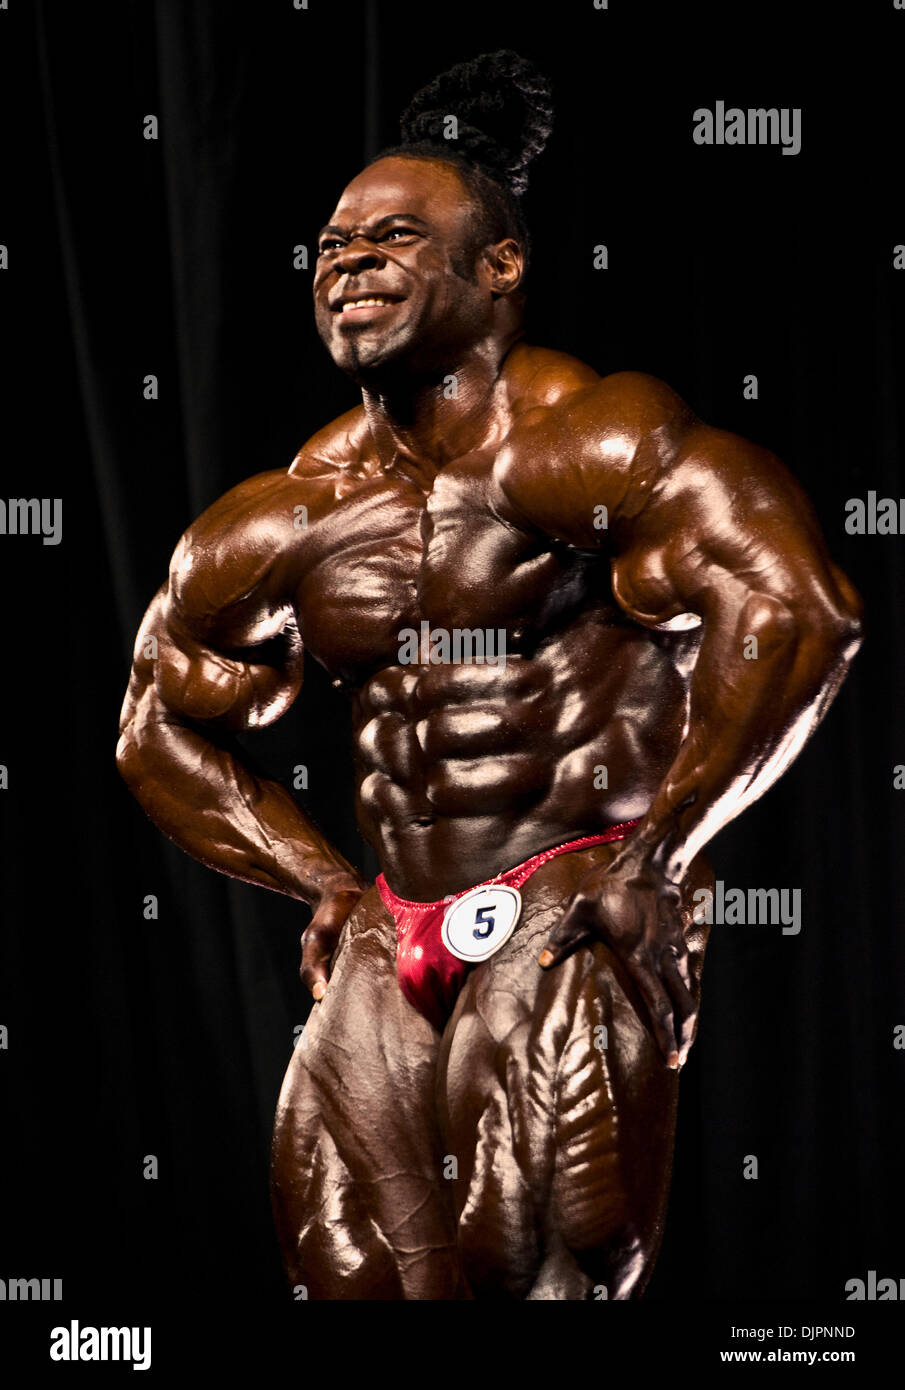 Evolution of Mr. Olympia - gallery of all poses from legendary bodybuilders  : r/bodybuilding